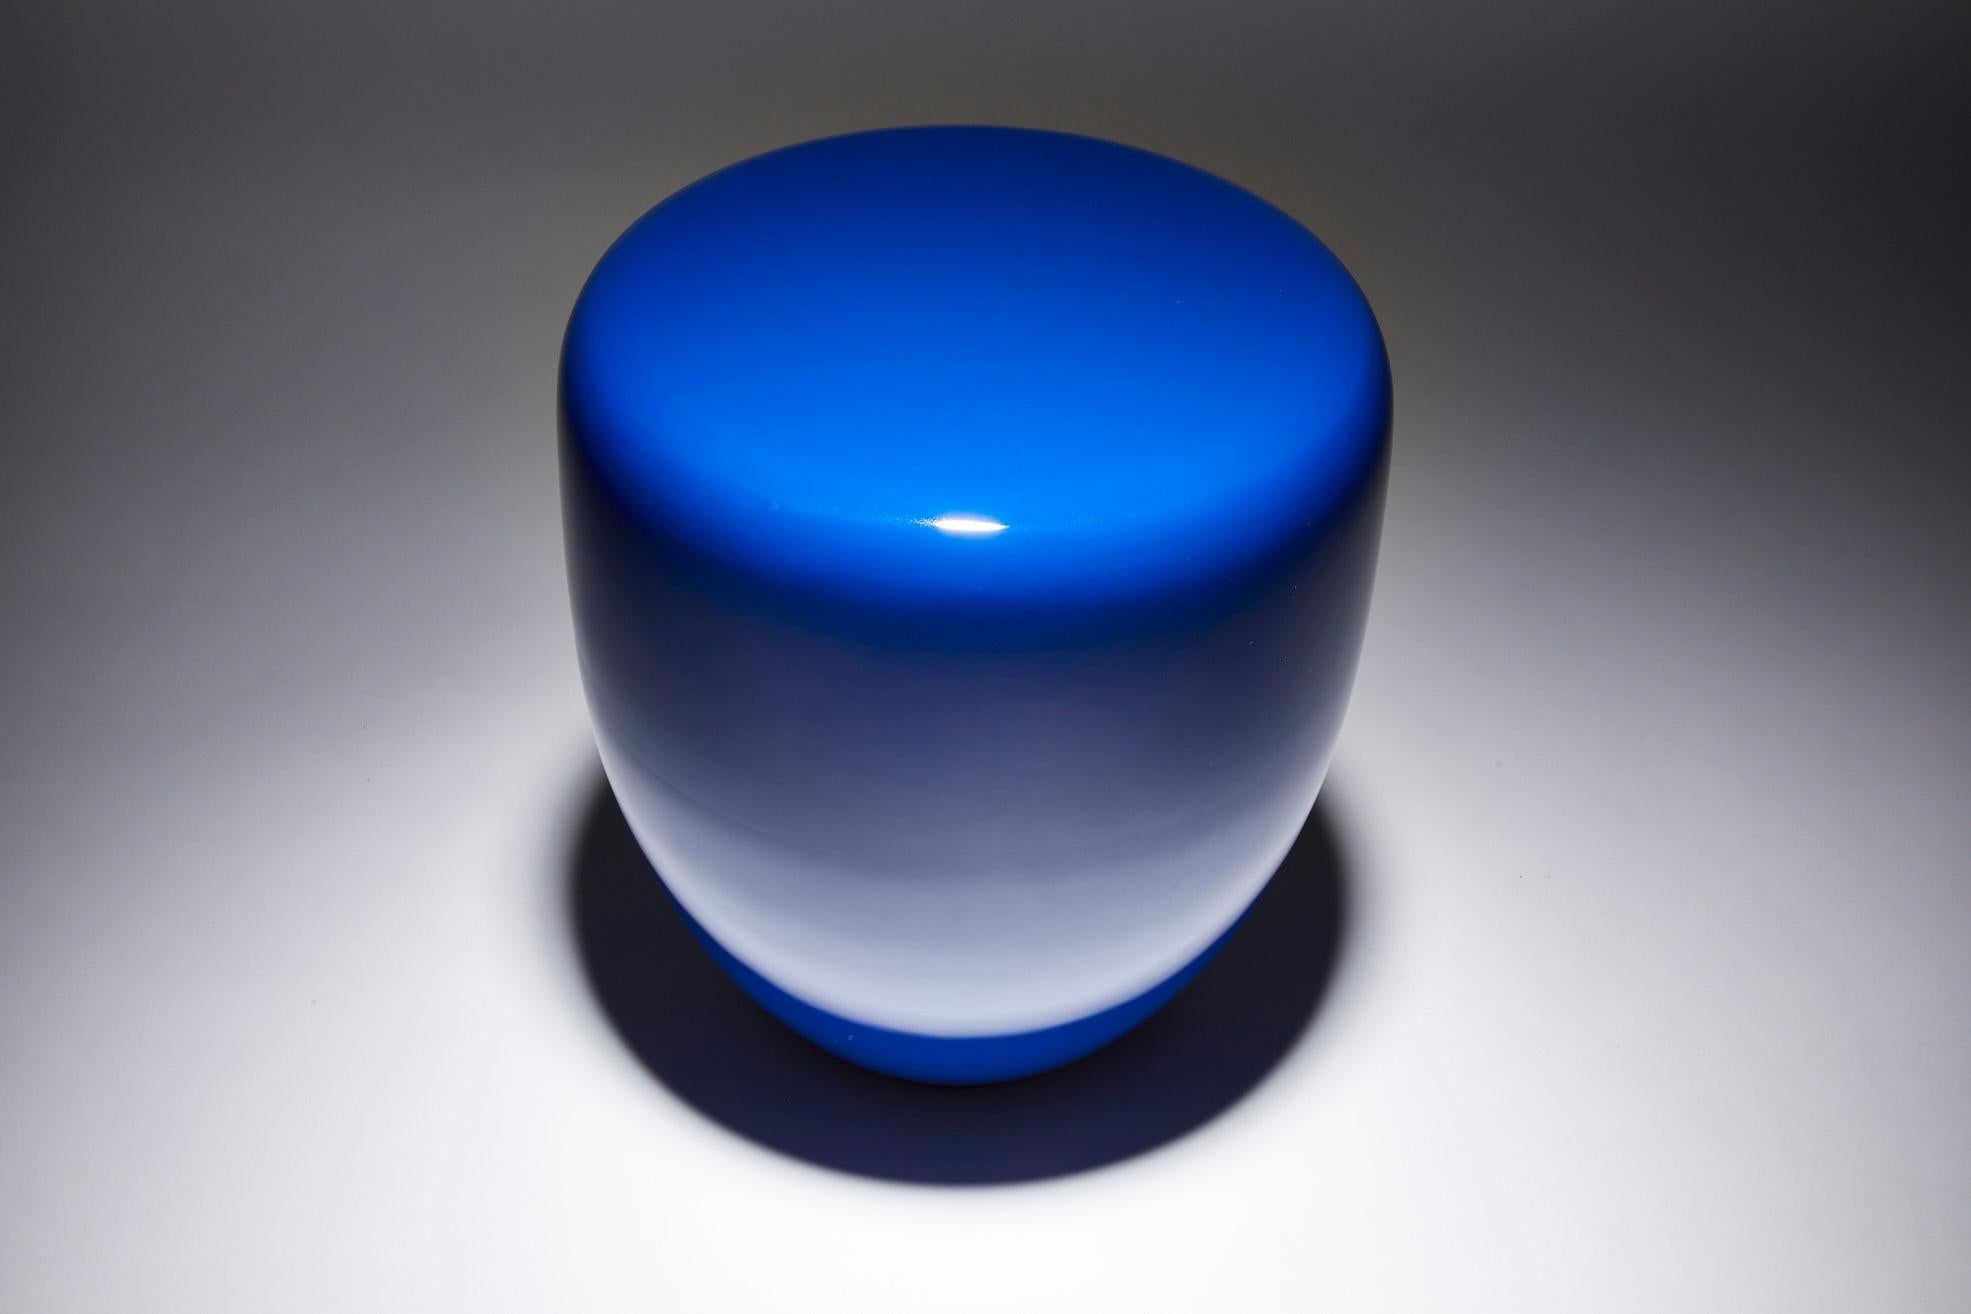 Lacquered Side Table, Persian Blue DOT by Reda Amalou Design, 2017 -Glossy or mate lacquer For Sale